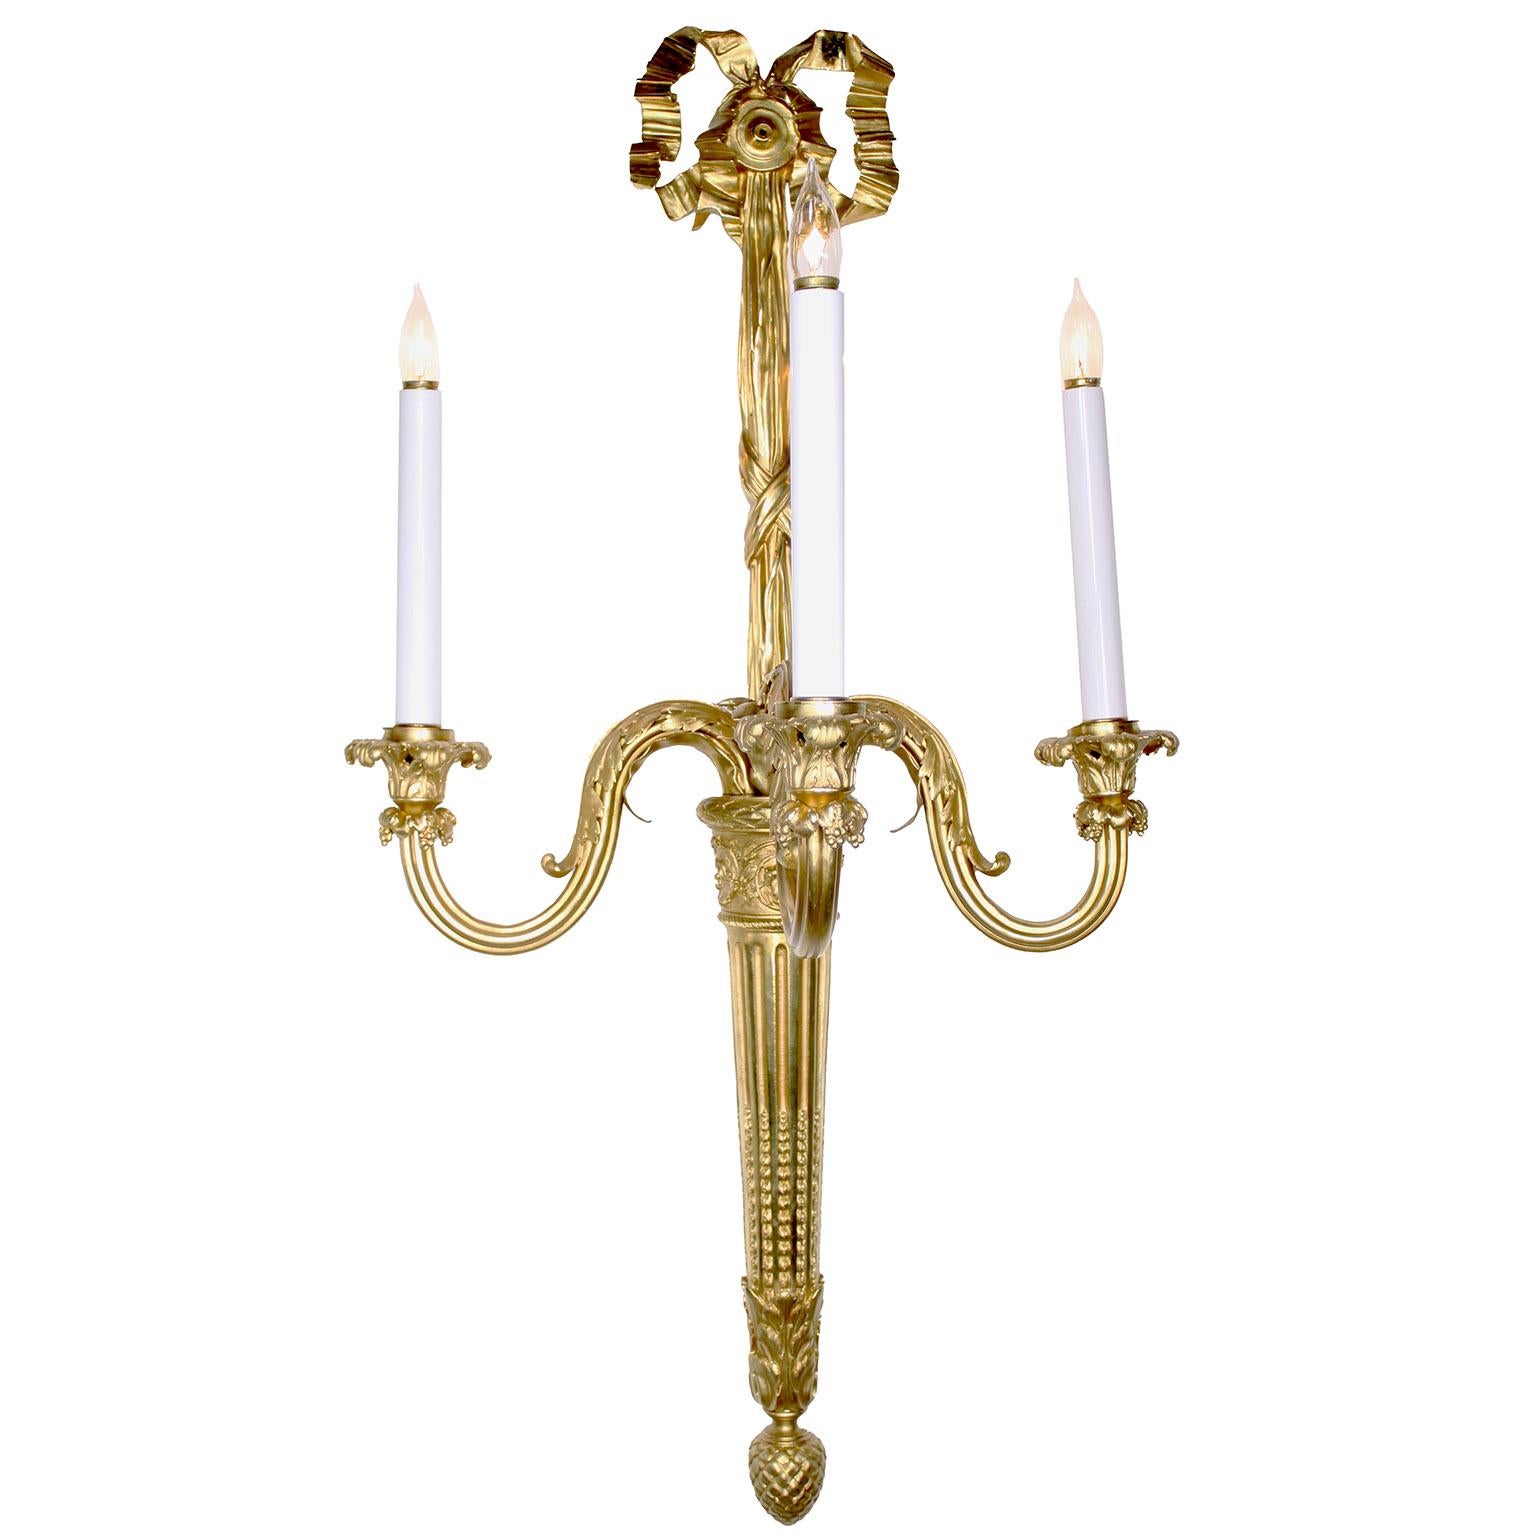 A Palatial Set of Four French 19th-20th Century Louis XVI Style Neoclassical Gilt-Bronze Three-Light Wall Lights (Sconces). The tall elongated ormolu sconces with a back plate in the form of a torch, each issuing three scrolling candle-arms,